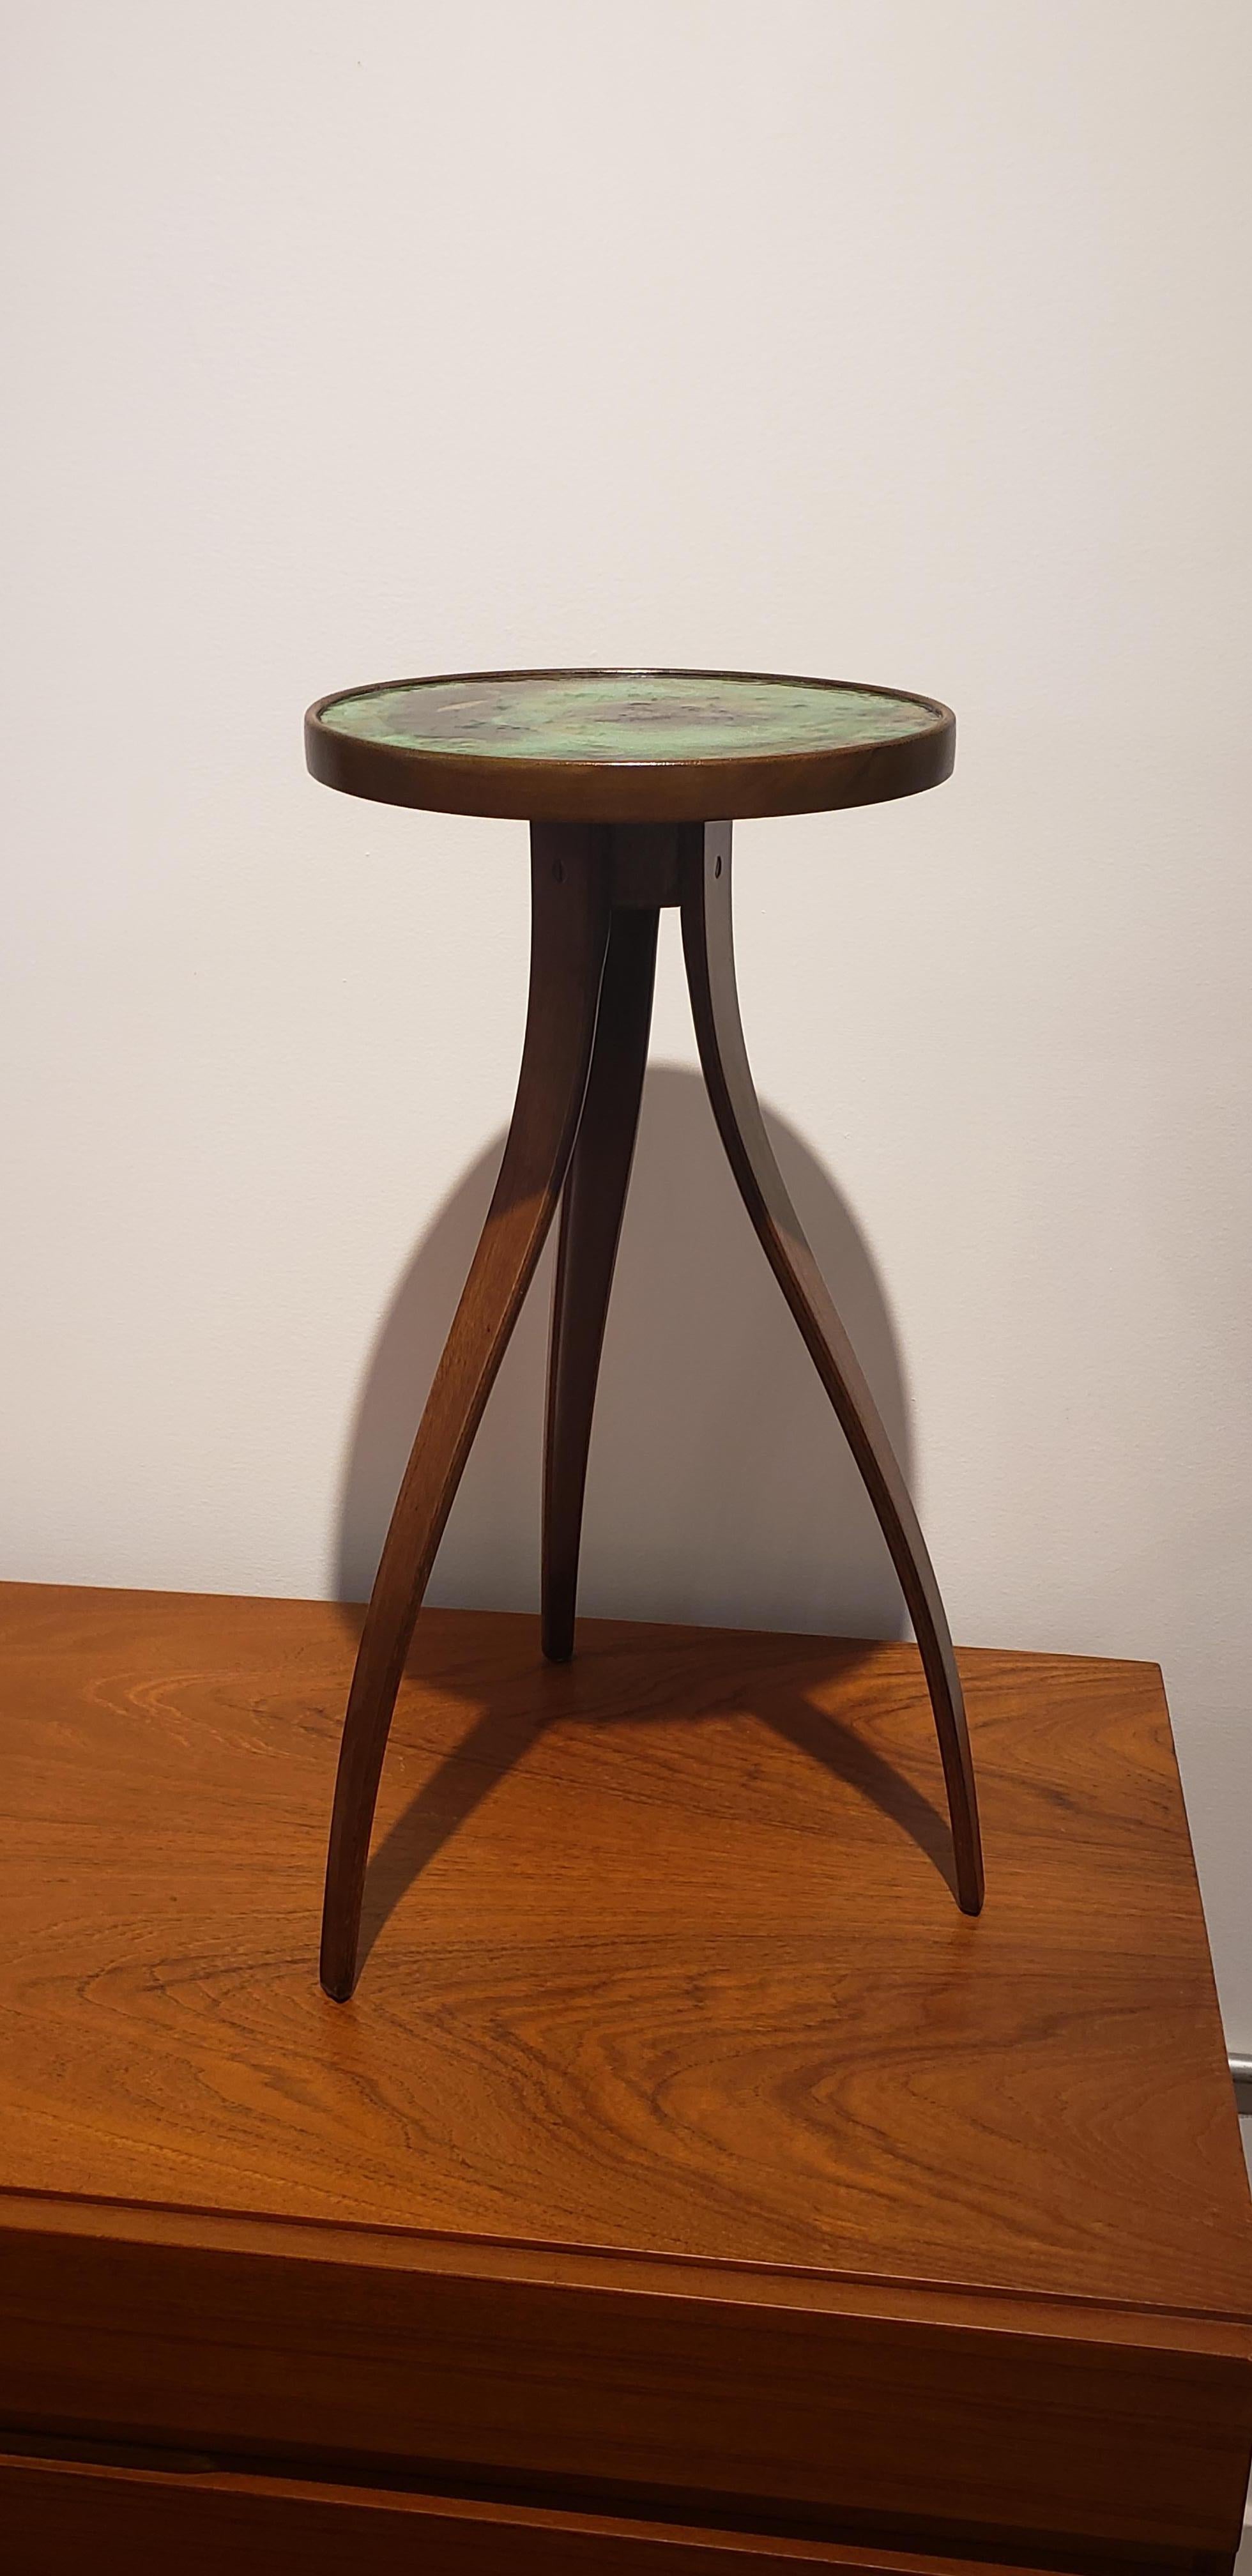 20th Century Rare Harvey Probber Mahogany Enamel Copper Round Side Drink Table For Sale